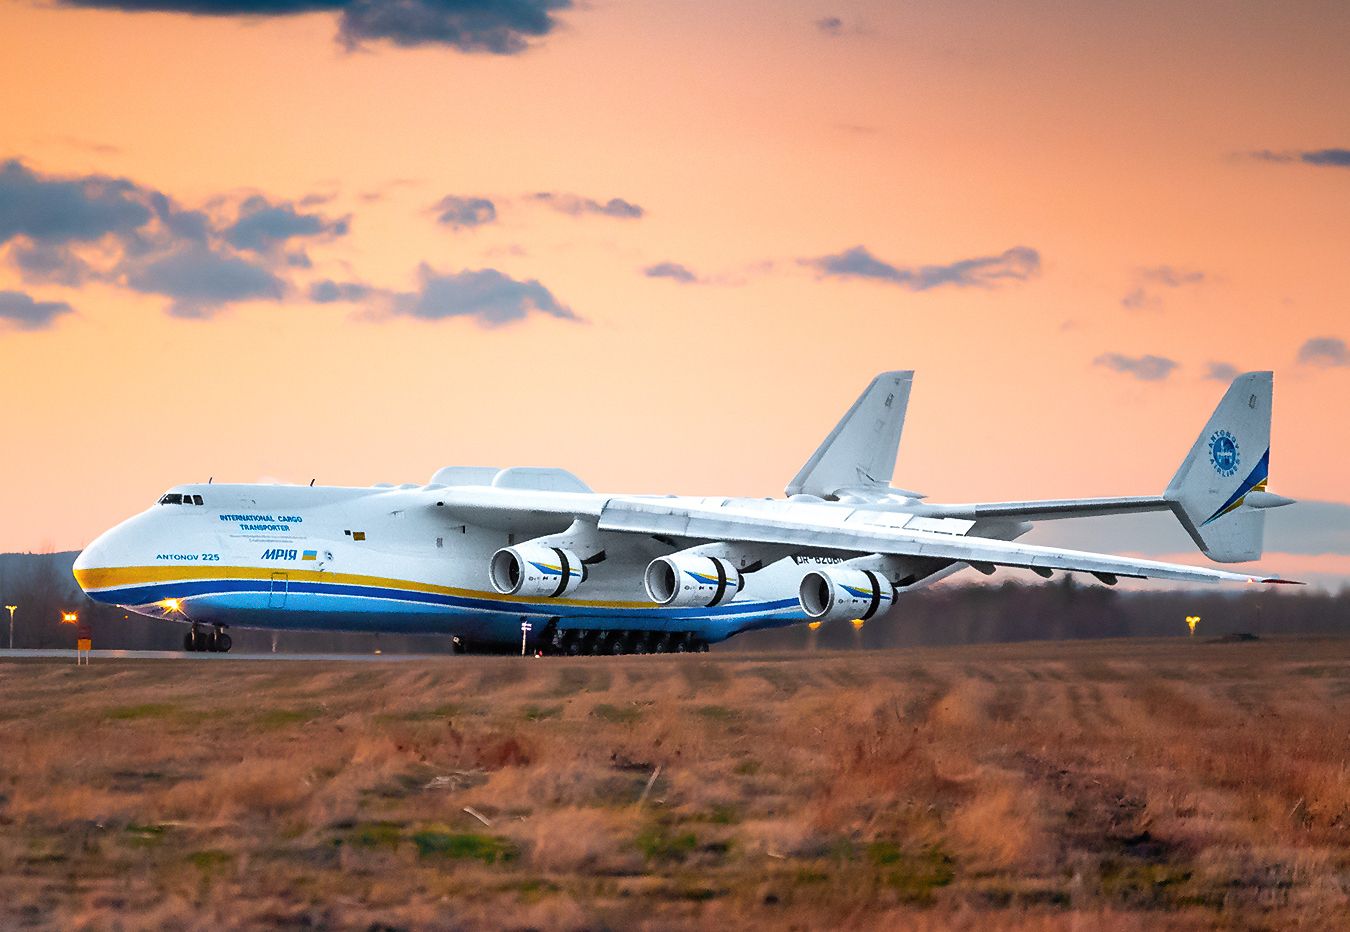 Goliath In The Sky: Behind The Scenes Of The Antonov An 225's Mission To Mirabel